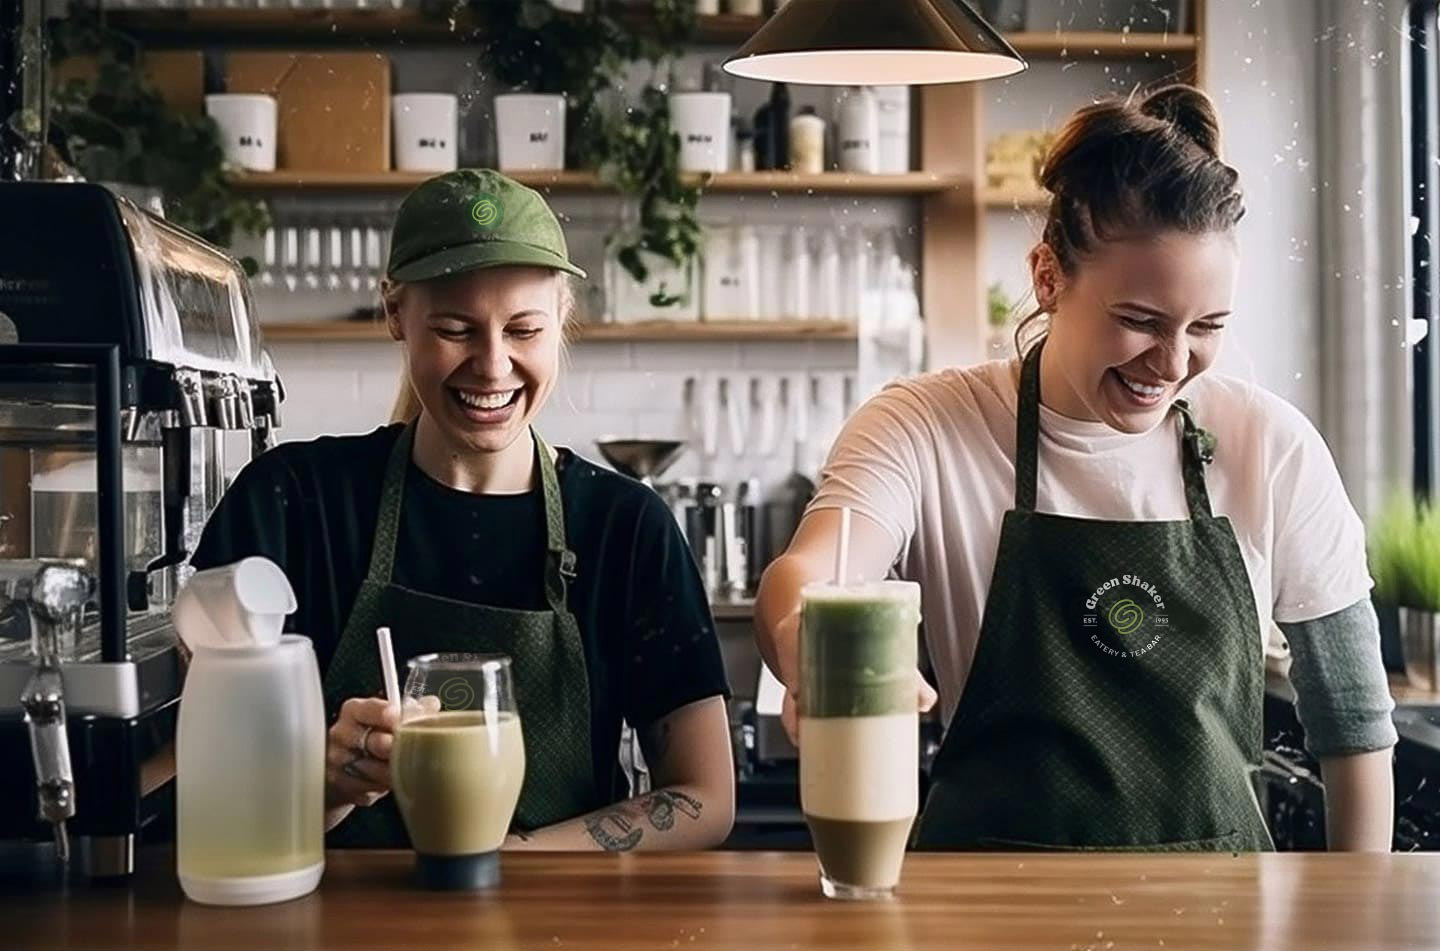 Green Shaker employees at work